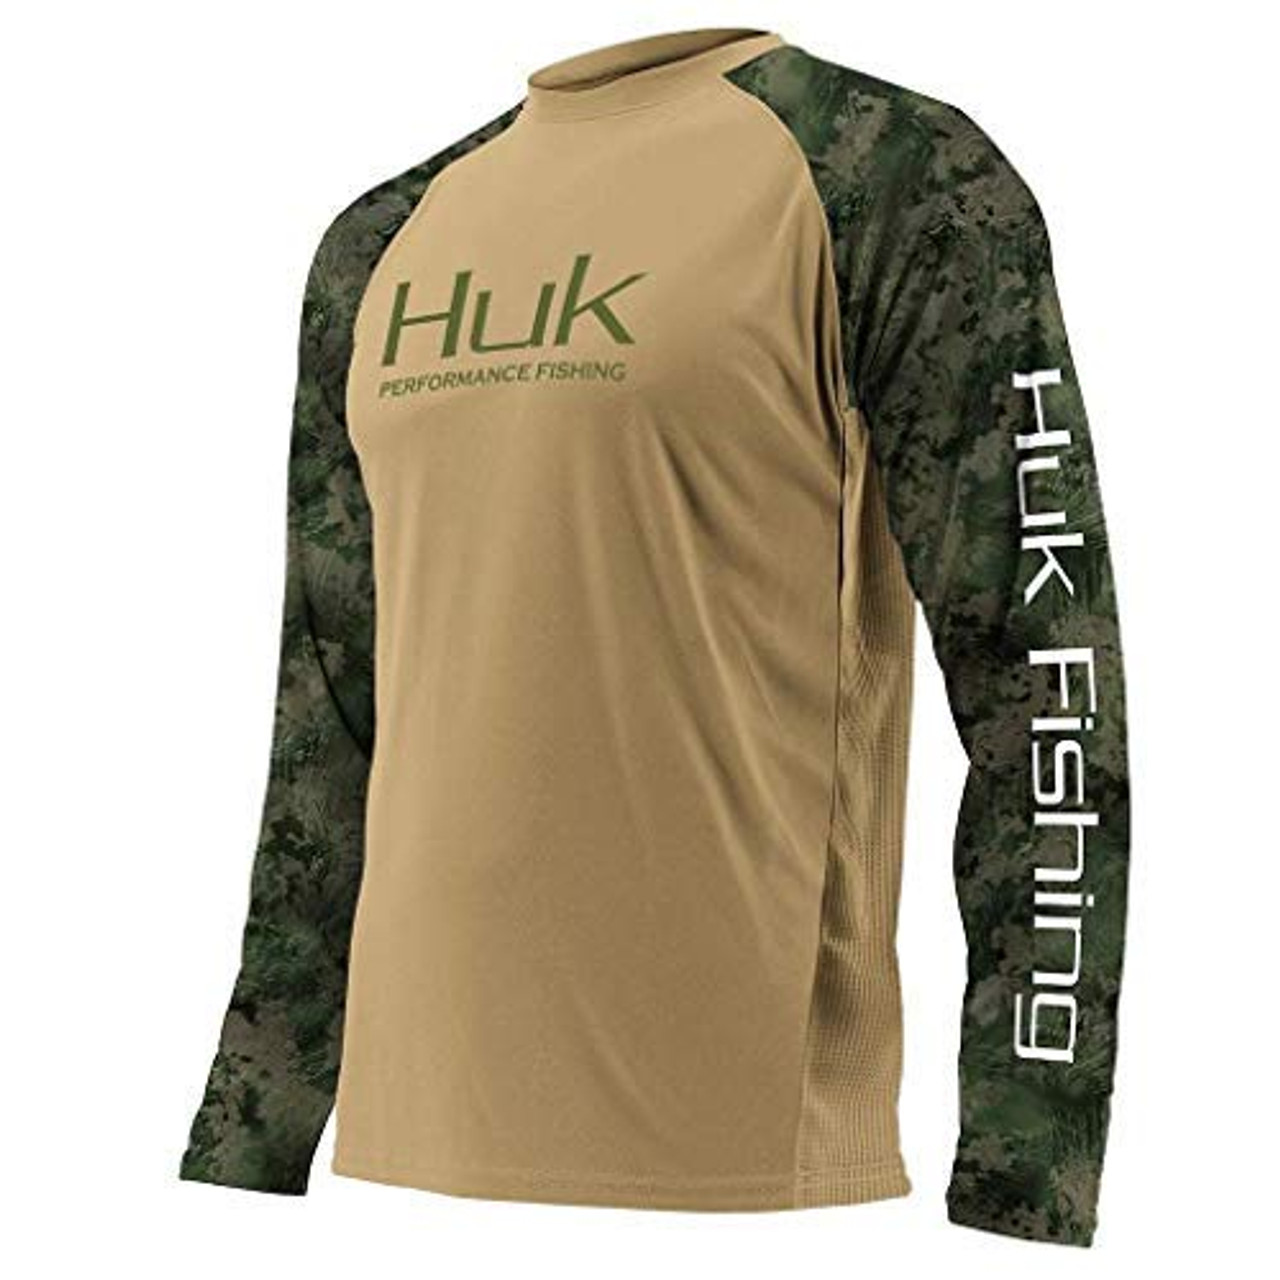 Huk Double Header Vented LS T Shirt, Southern Tier, 2XL - H1200136-250-XXL